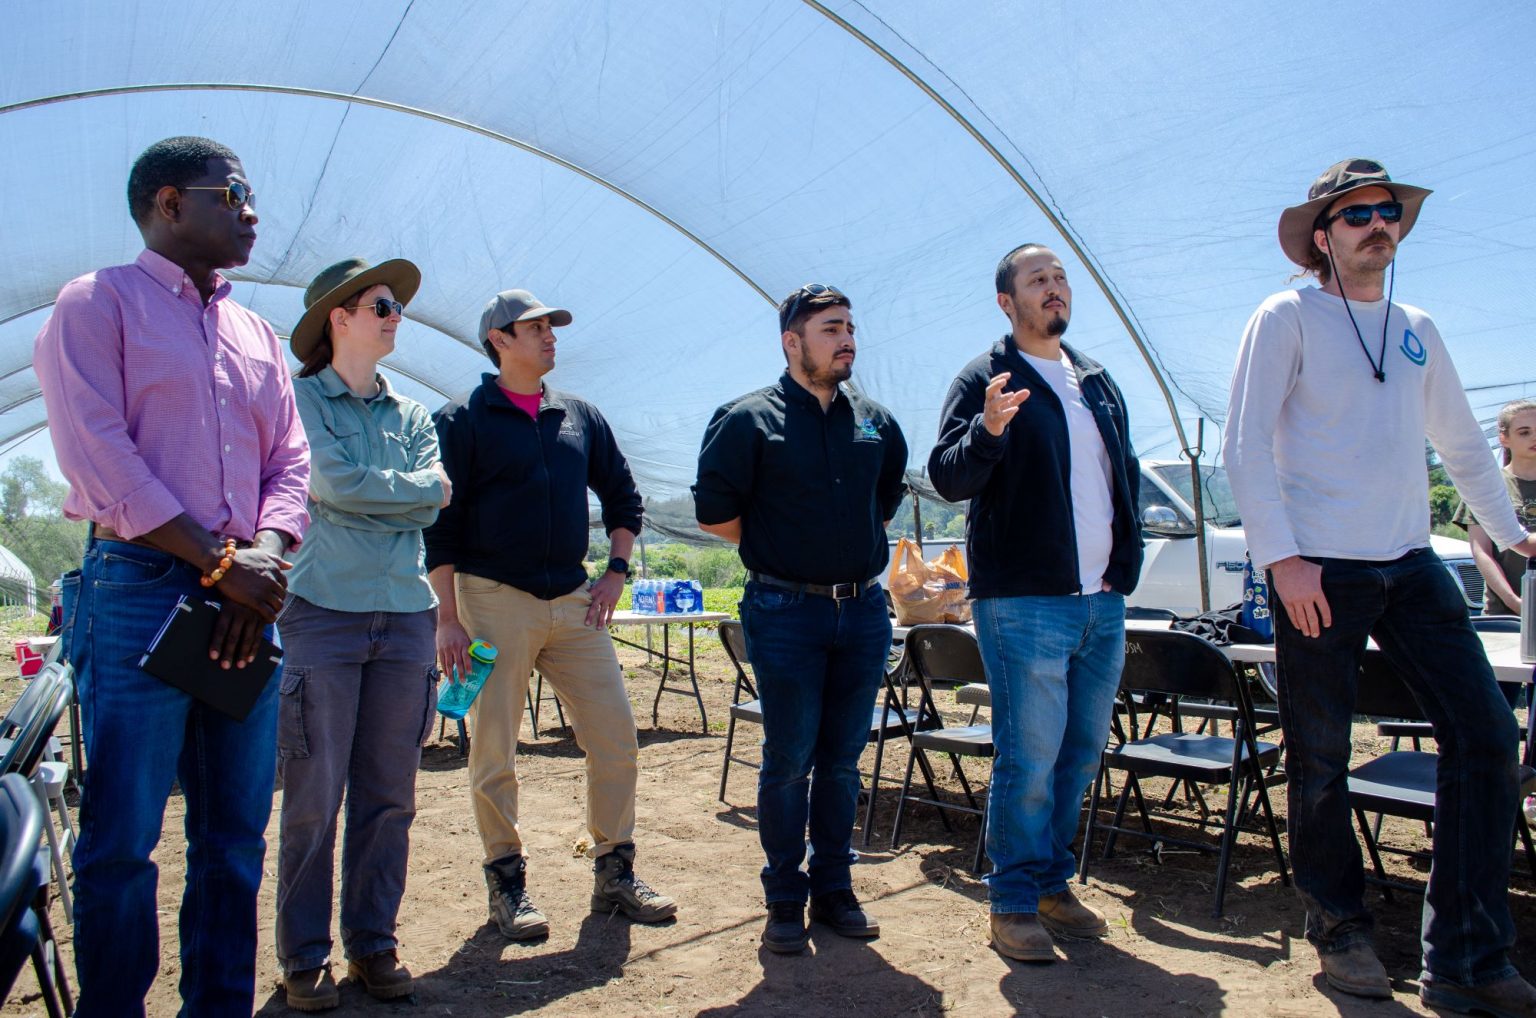 Area farmers discuss management practices as part of ACAM’s farmer learning network at Zamora’s JSM Organics Farm.